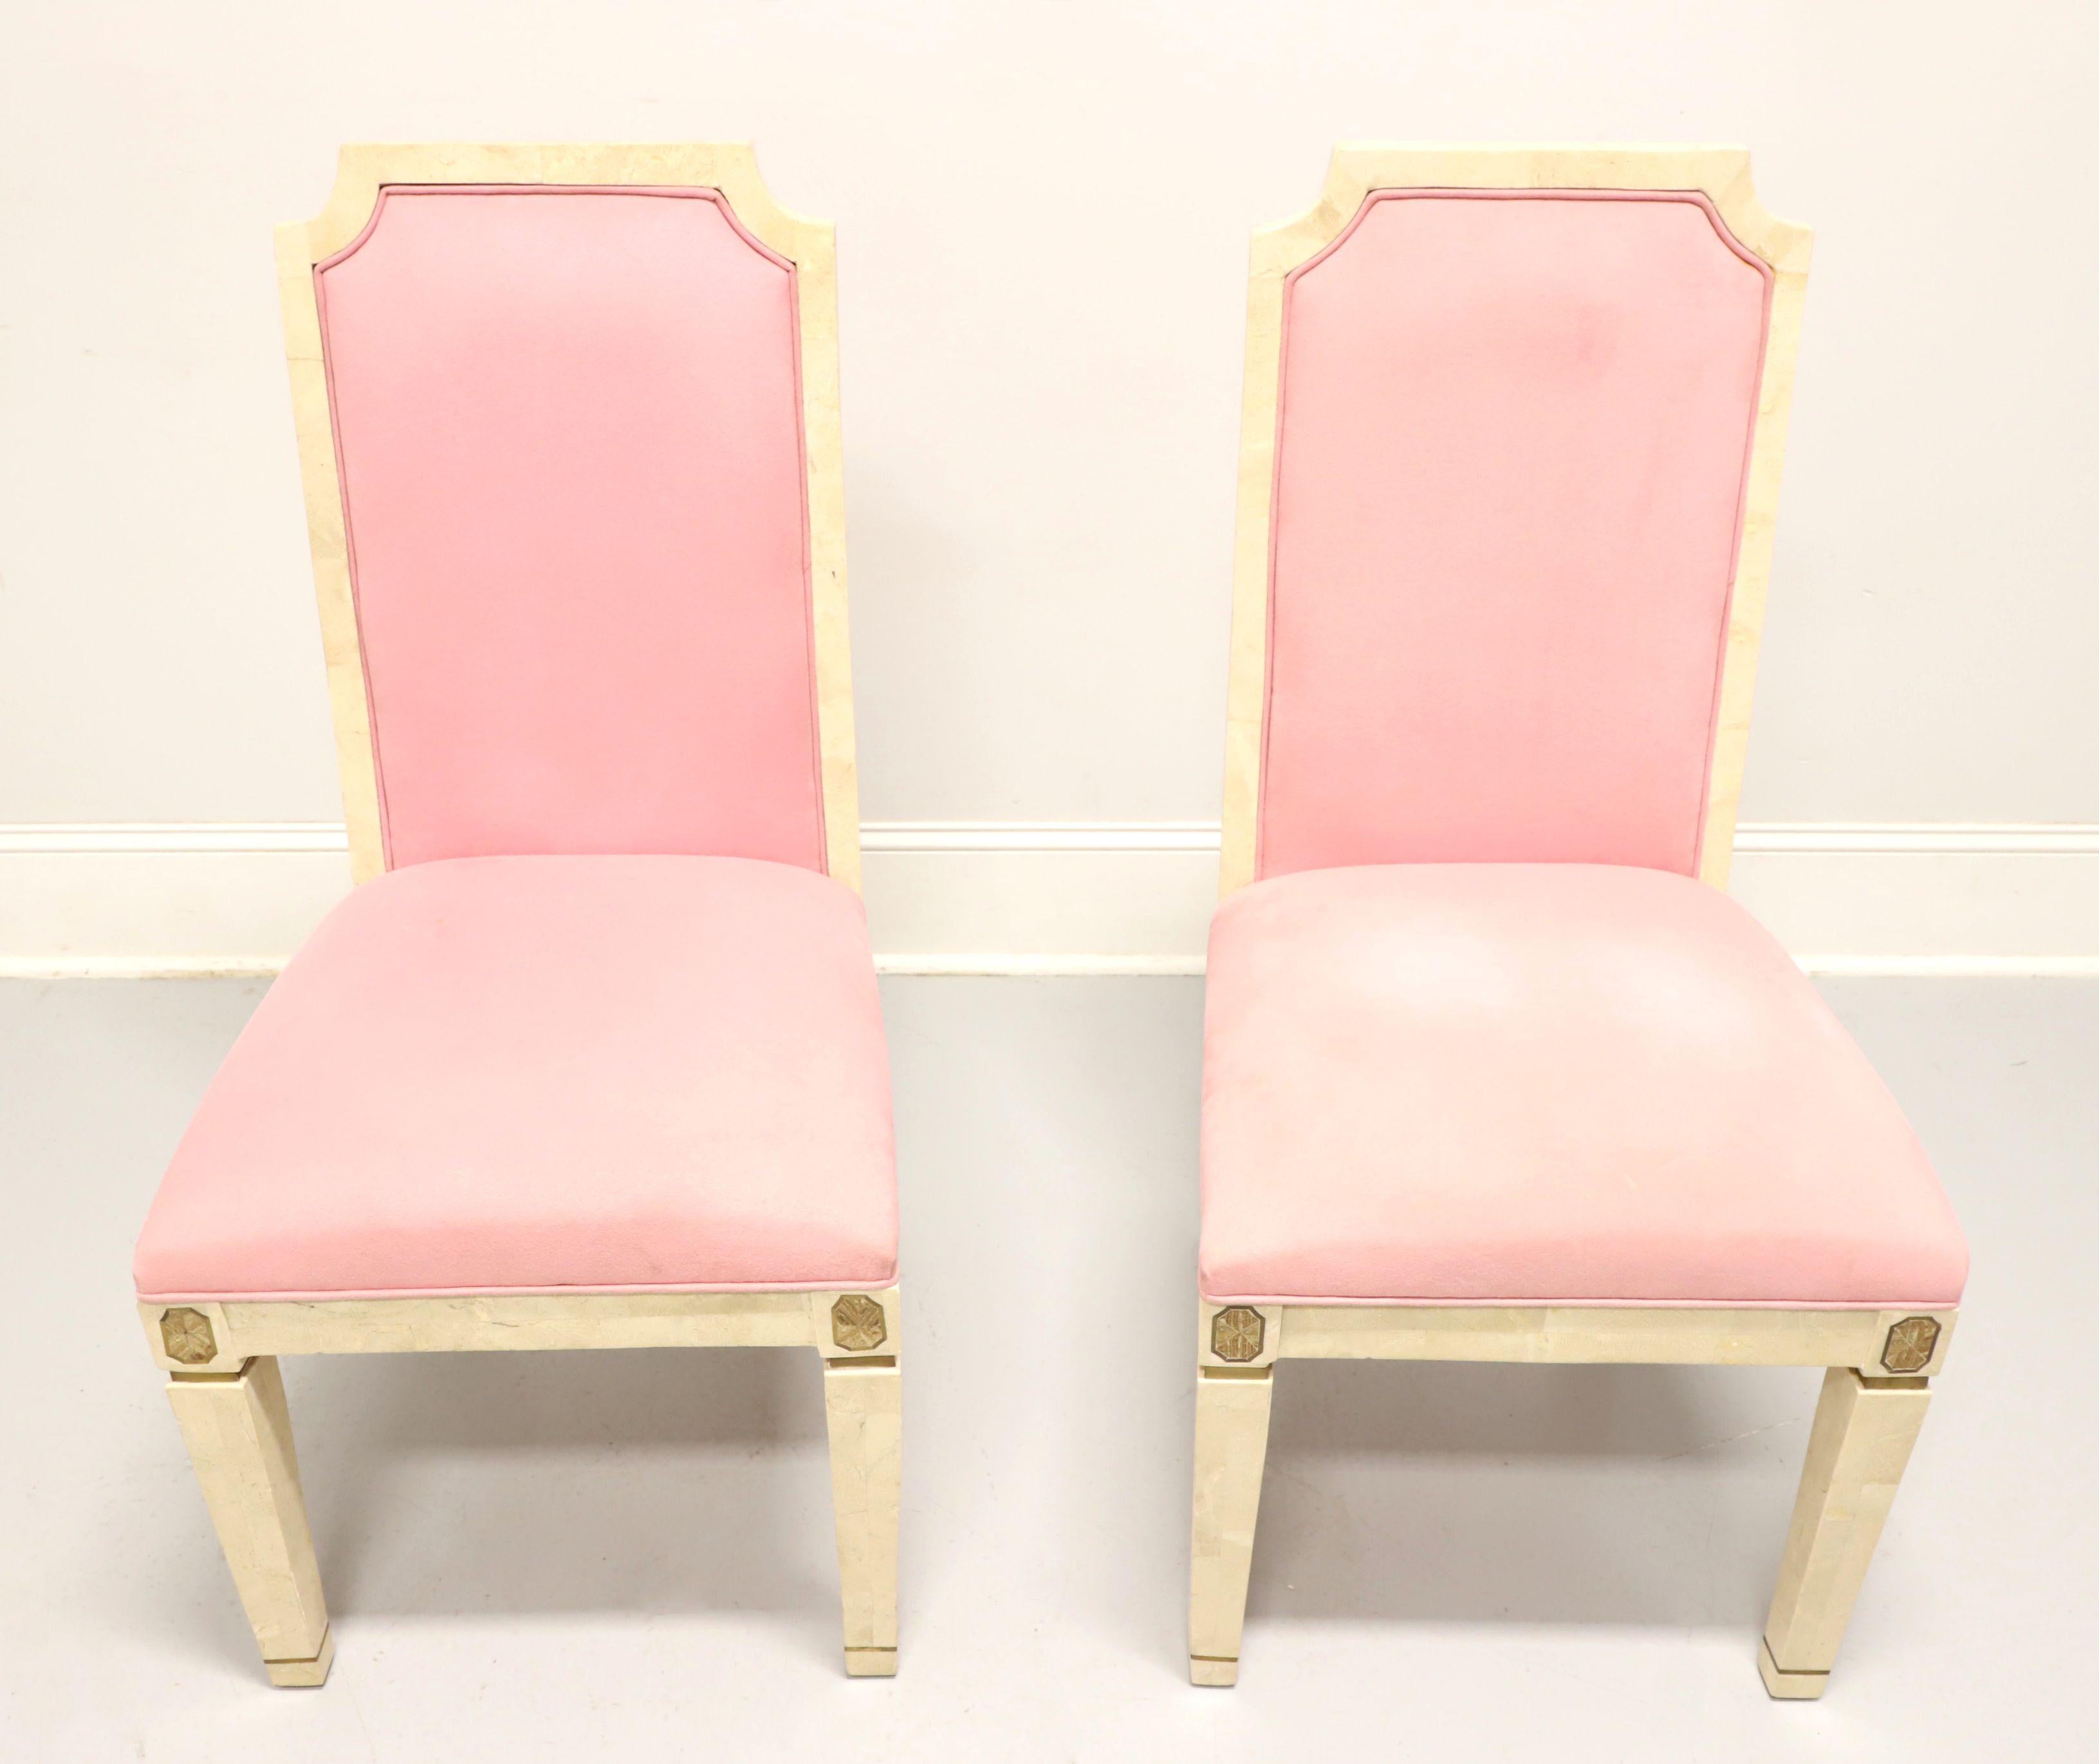 A pair of neoclassical style side chairs by Casa Bique, of Thomasville, North Carolina, USA. Solid wood frame with tessellated white marble veneers, high backs, pink velvet like fabric upholstered backs & seats, gold emblem trim to each side of